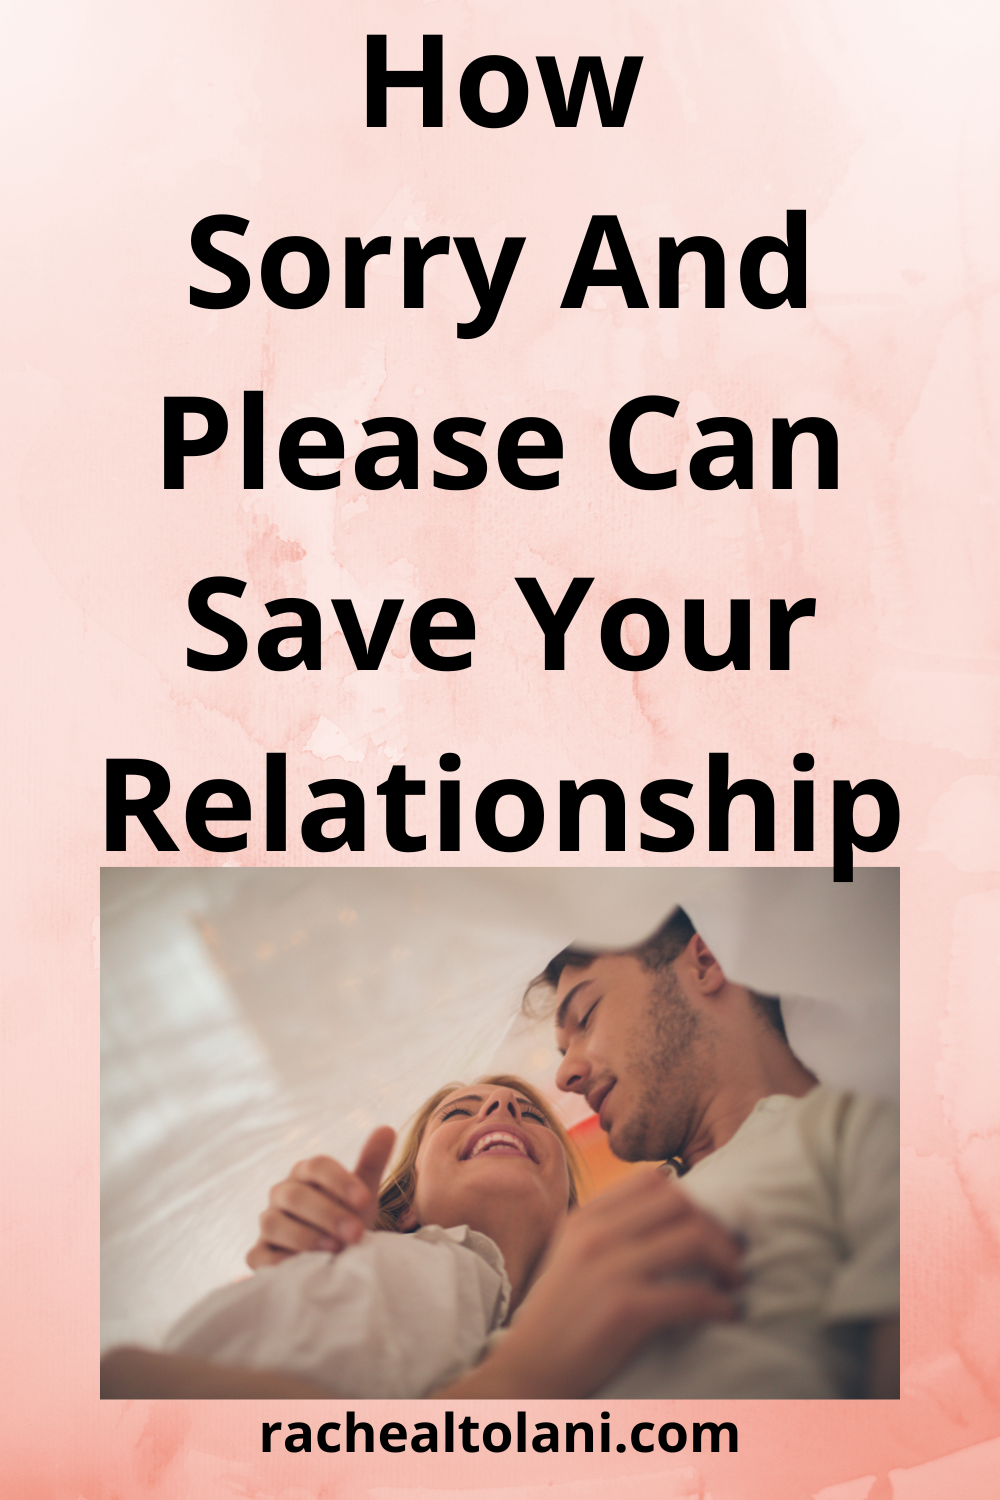 What sorry and please do in a marriage